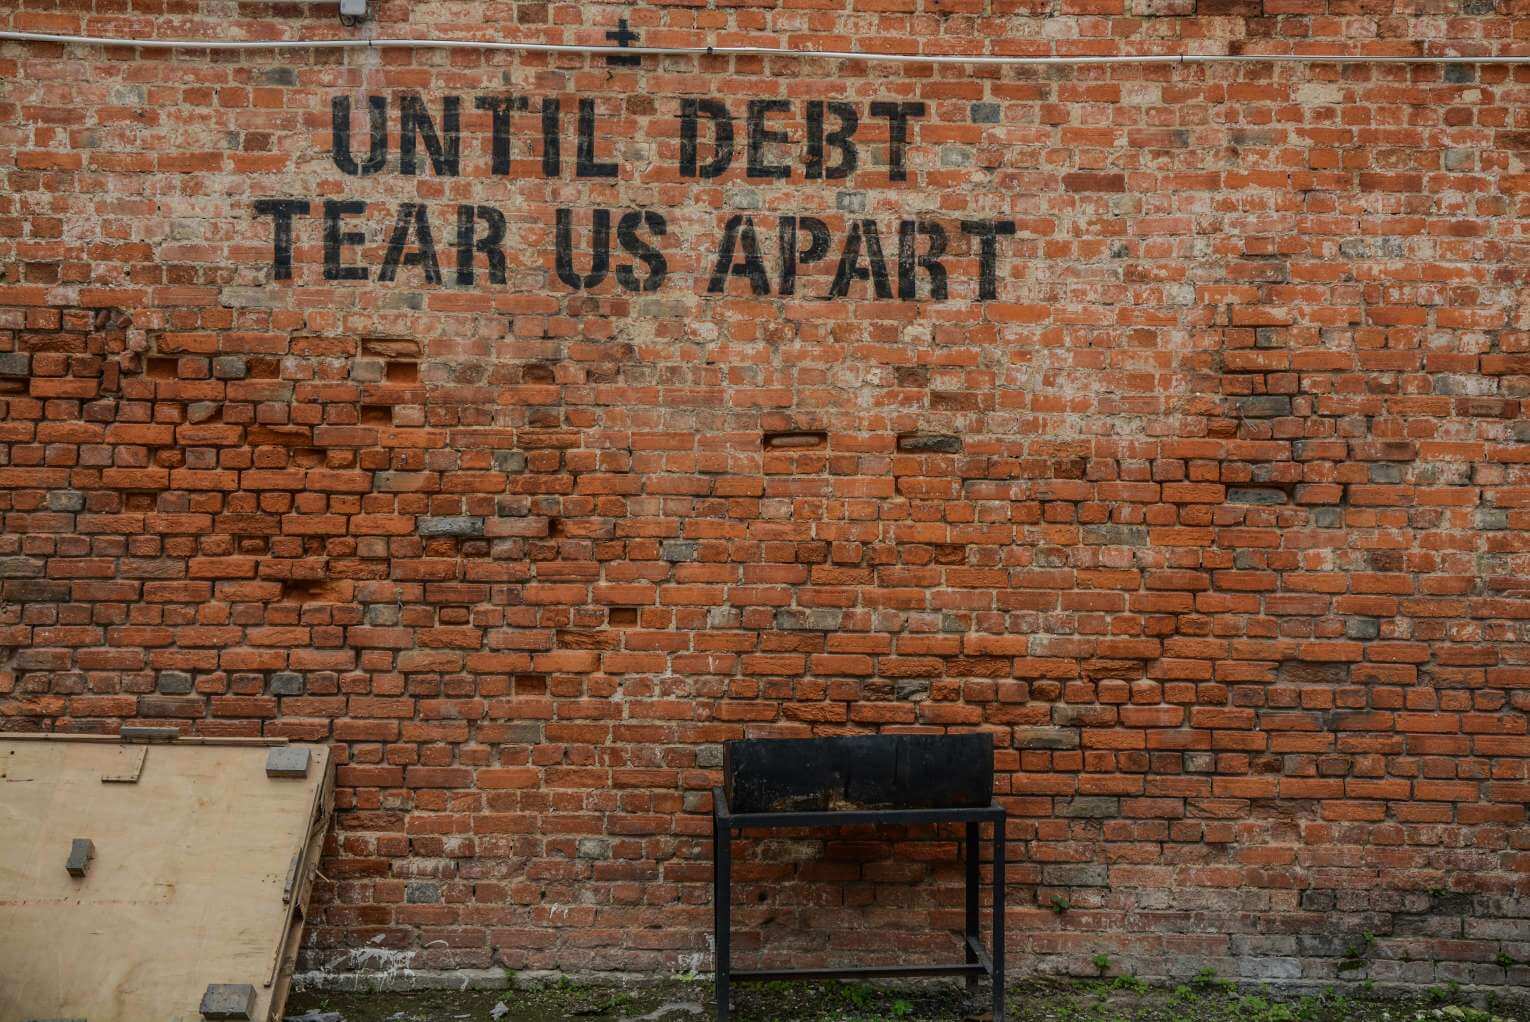 Dealing With Debt: Our Family Budgets and the Travesty of Our Nation’s Out-of-Control Spending